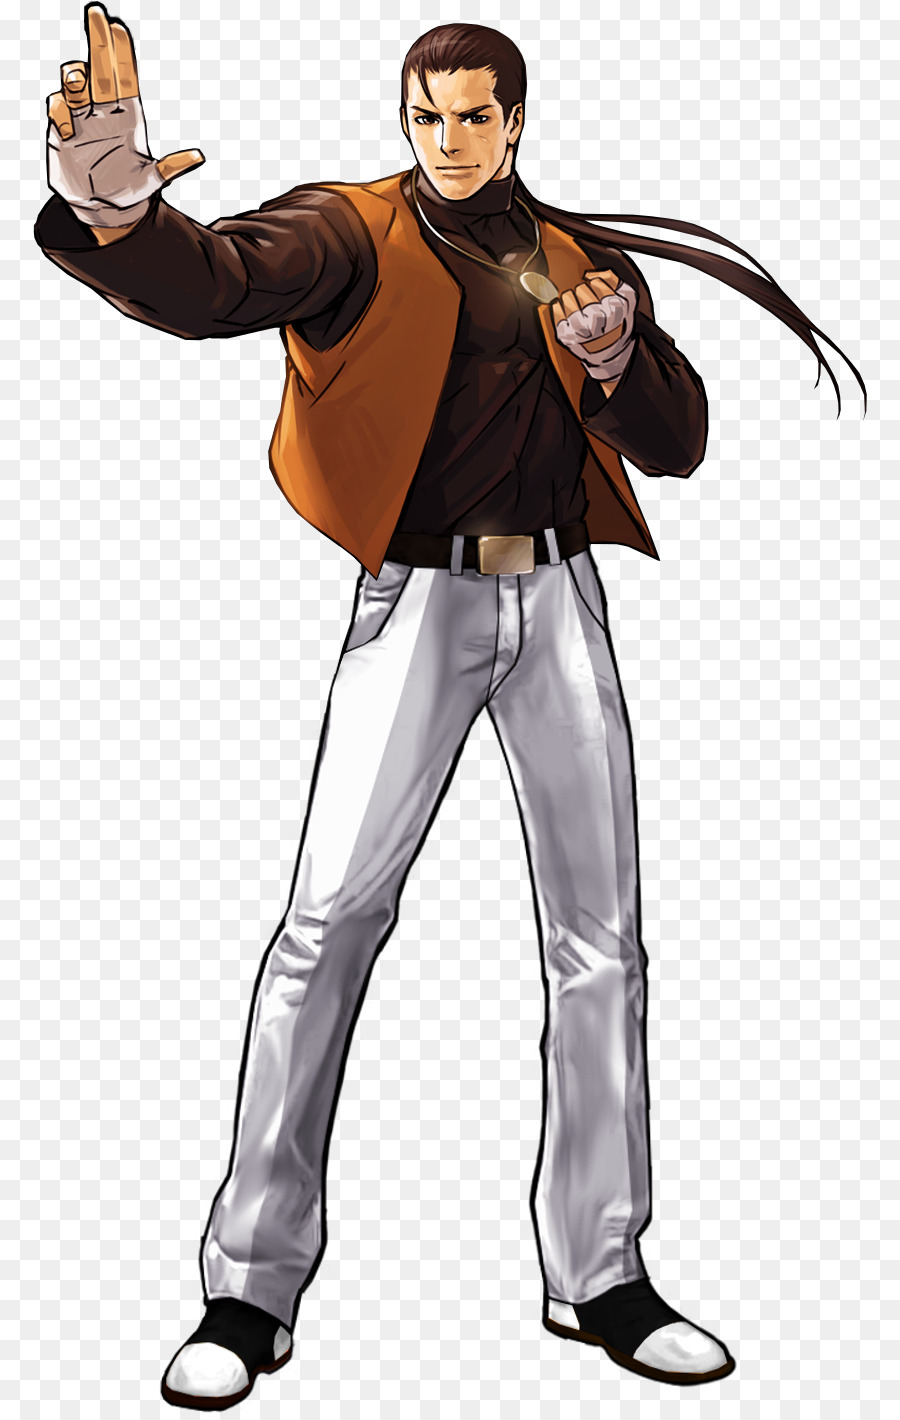 The King of Fighters 2002: Unlimited Match The King of Fighters XIII, The King of Fighters XIV, Iori Yagami - 65